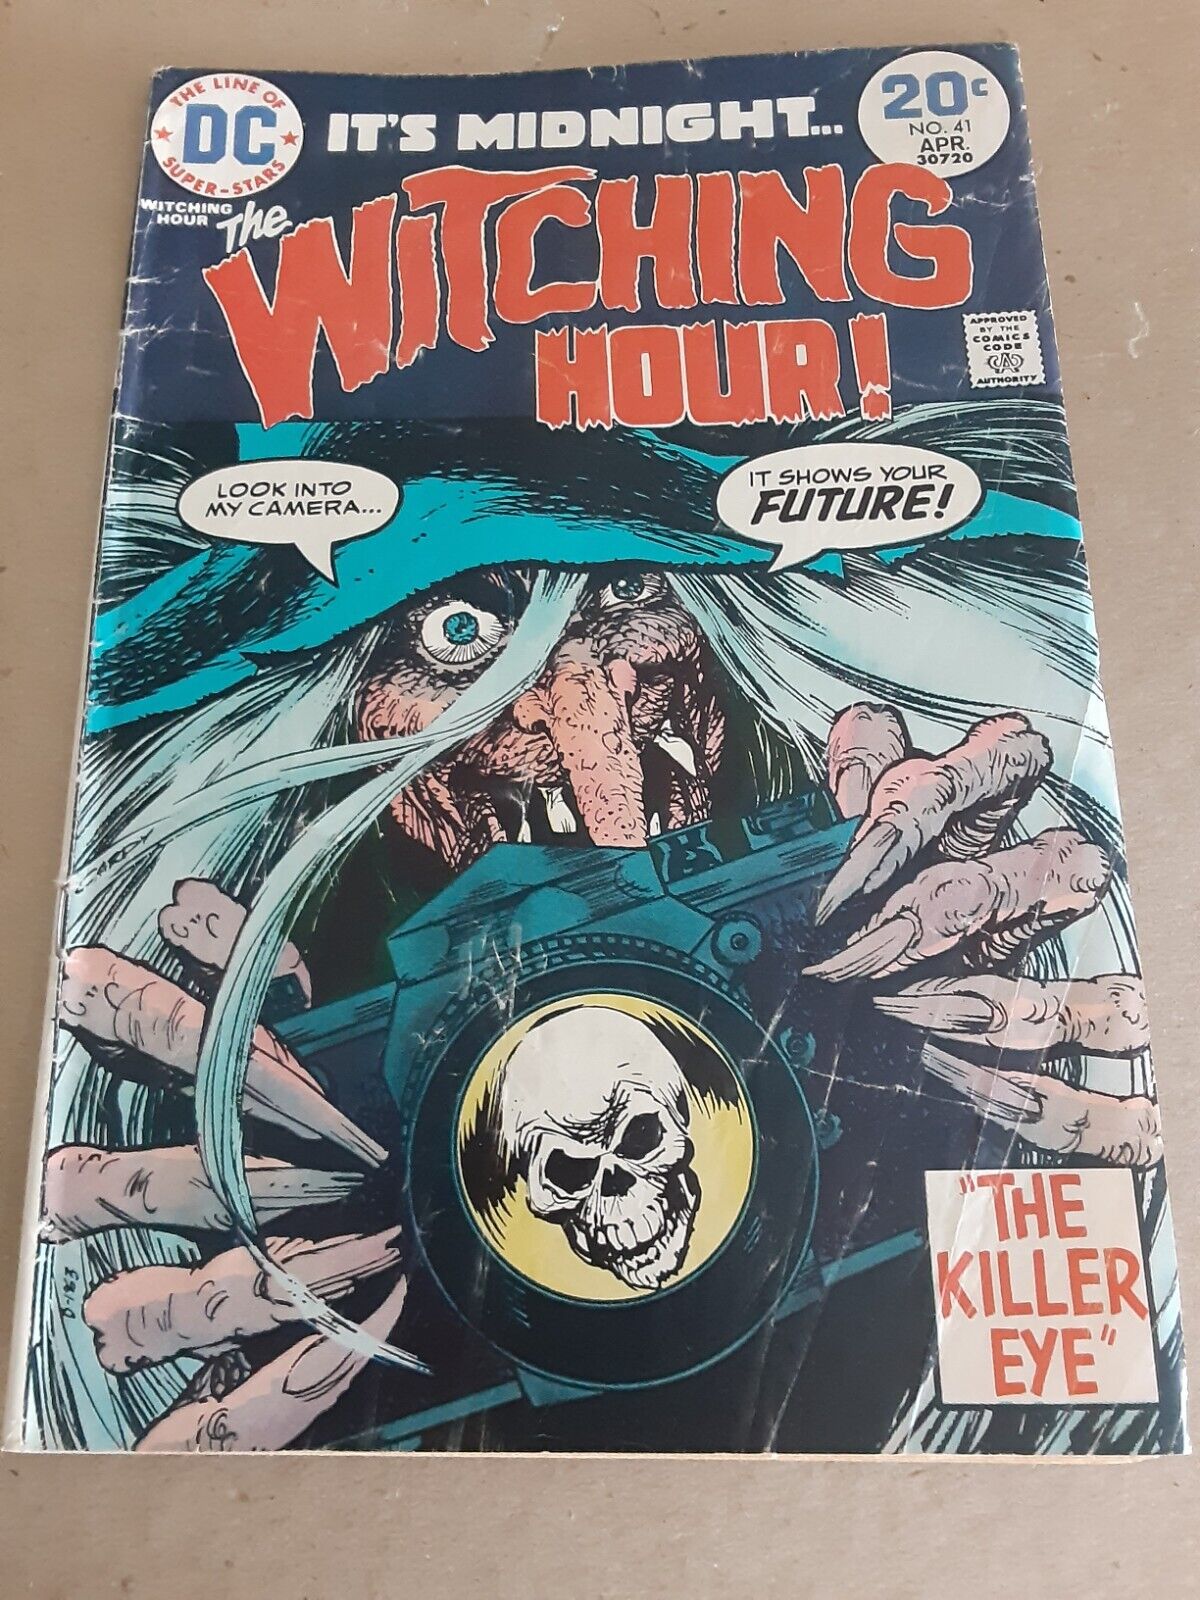 The Witching Hour # 41 DC " The  Killer Eye!" 1974 GD+